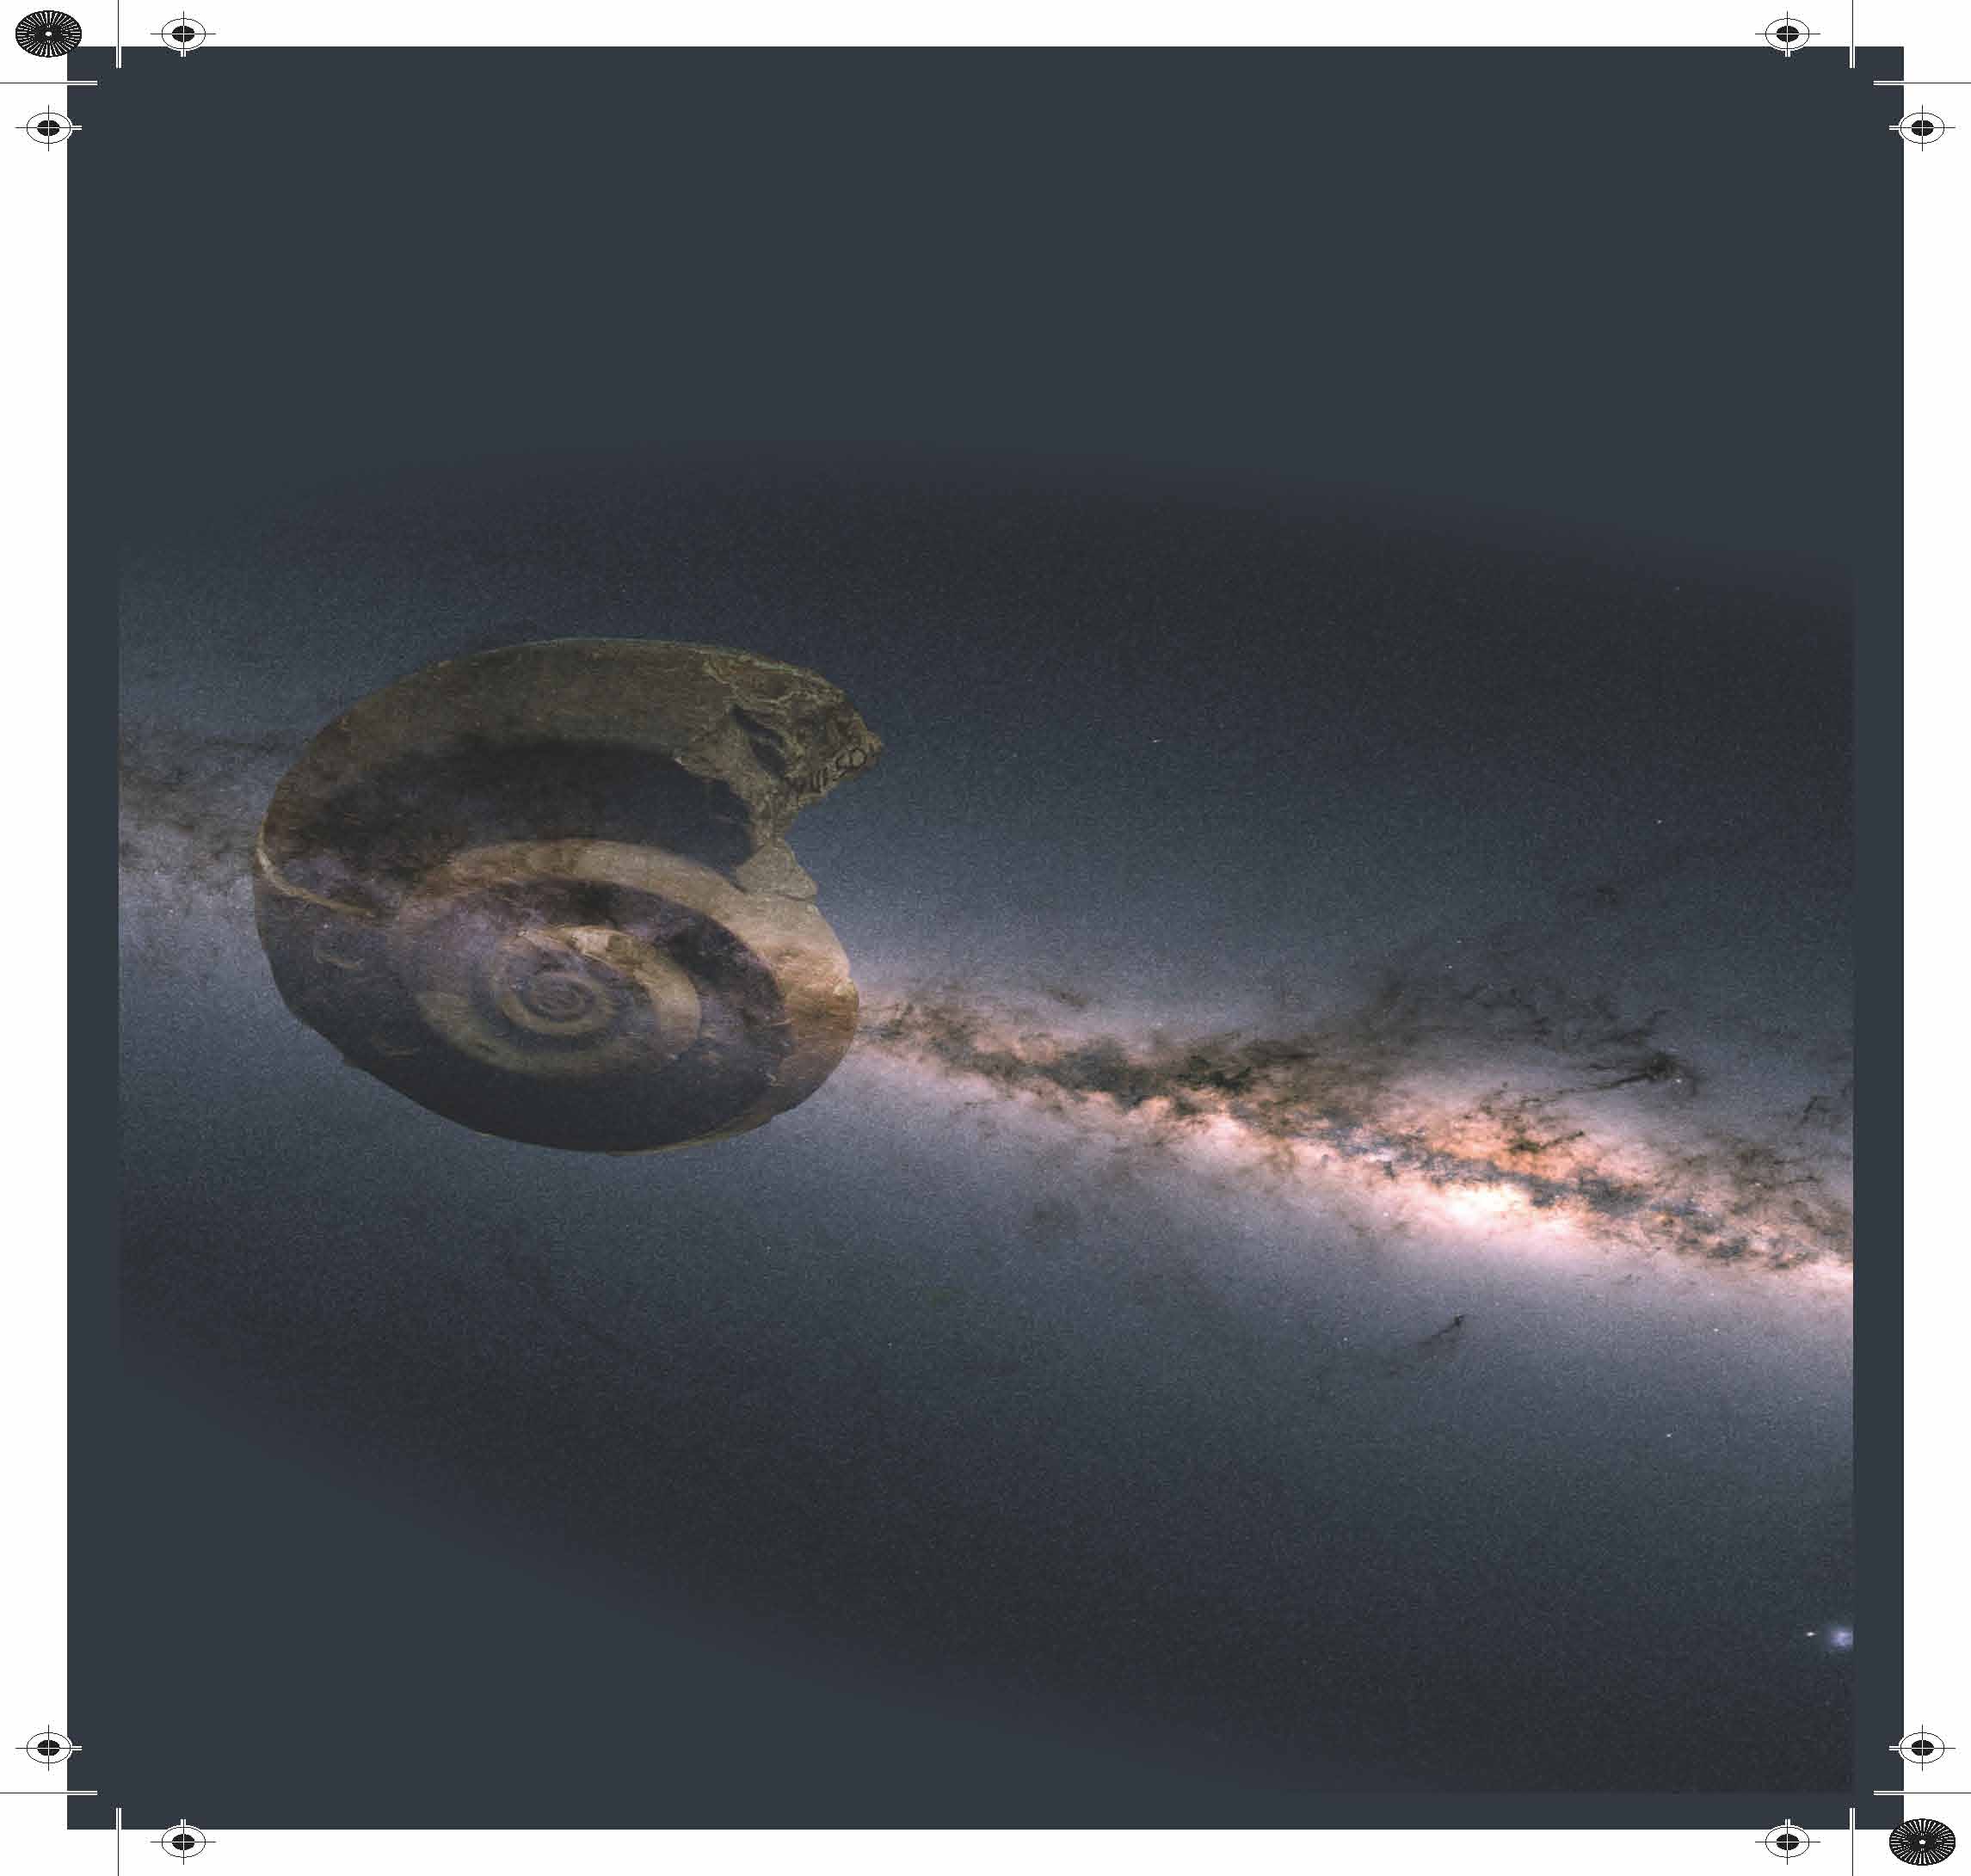 Artistic impression of the snail-like structure discovered by the team superimposed on a colour map of the Milky Way recently published by the Gaia collaboration (April 2018). The snail shell appears when combining the position and velocities of stars near the Sun. Its characteristics depend on what caused it and hence it can be used to do galactic archeology: we can trace the origin of the snail shell to an encounter the Milky Way experienced in the recent past. (c): Surinye Olarte, ICCUB. Gaia sky in colours: ESA/Gaia/DPAC, A.Moitinho / A. F. Silva / M. Barros / C. Barata, University of Lisbon, Portugal; H. Savietto, Fork Research, Portugal.Artistic impression of the snail-like structure discovered by the team superimposed on a colour map of the Milky Way recently published by the Gaia collaboration (April 2018). The snail shell appears when combining the position and velocities of stars near the Sun. Its characteristics depend on what caused it and hence it can be used to do galactic archeology: we can trace the origin of the snail shell to an encounter the Milky Way experienced in the recent past. (c): Surinye Olarte, ICCUB. Gaia sky in colours: ESA/Gaia/DPAC, A.Moitinho / A. F. Silva / M. Barros / C. Barata, University of Lisbon, Portugal; H. Savietto, Fork Research, Portugal.